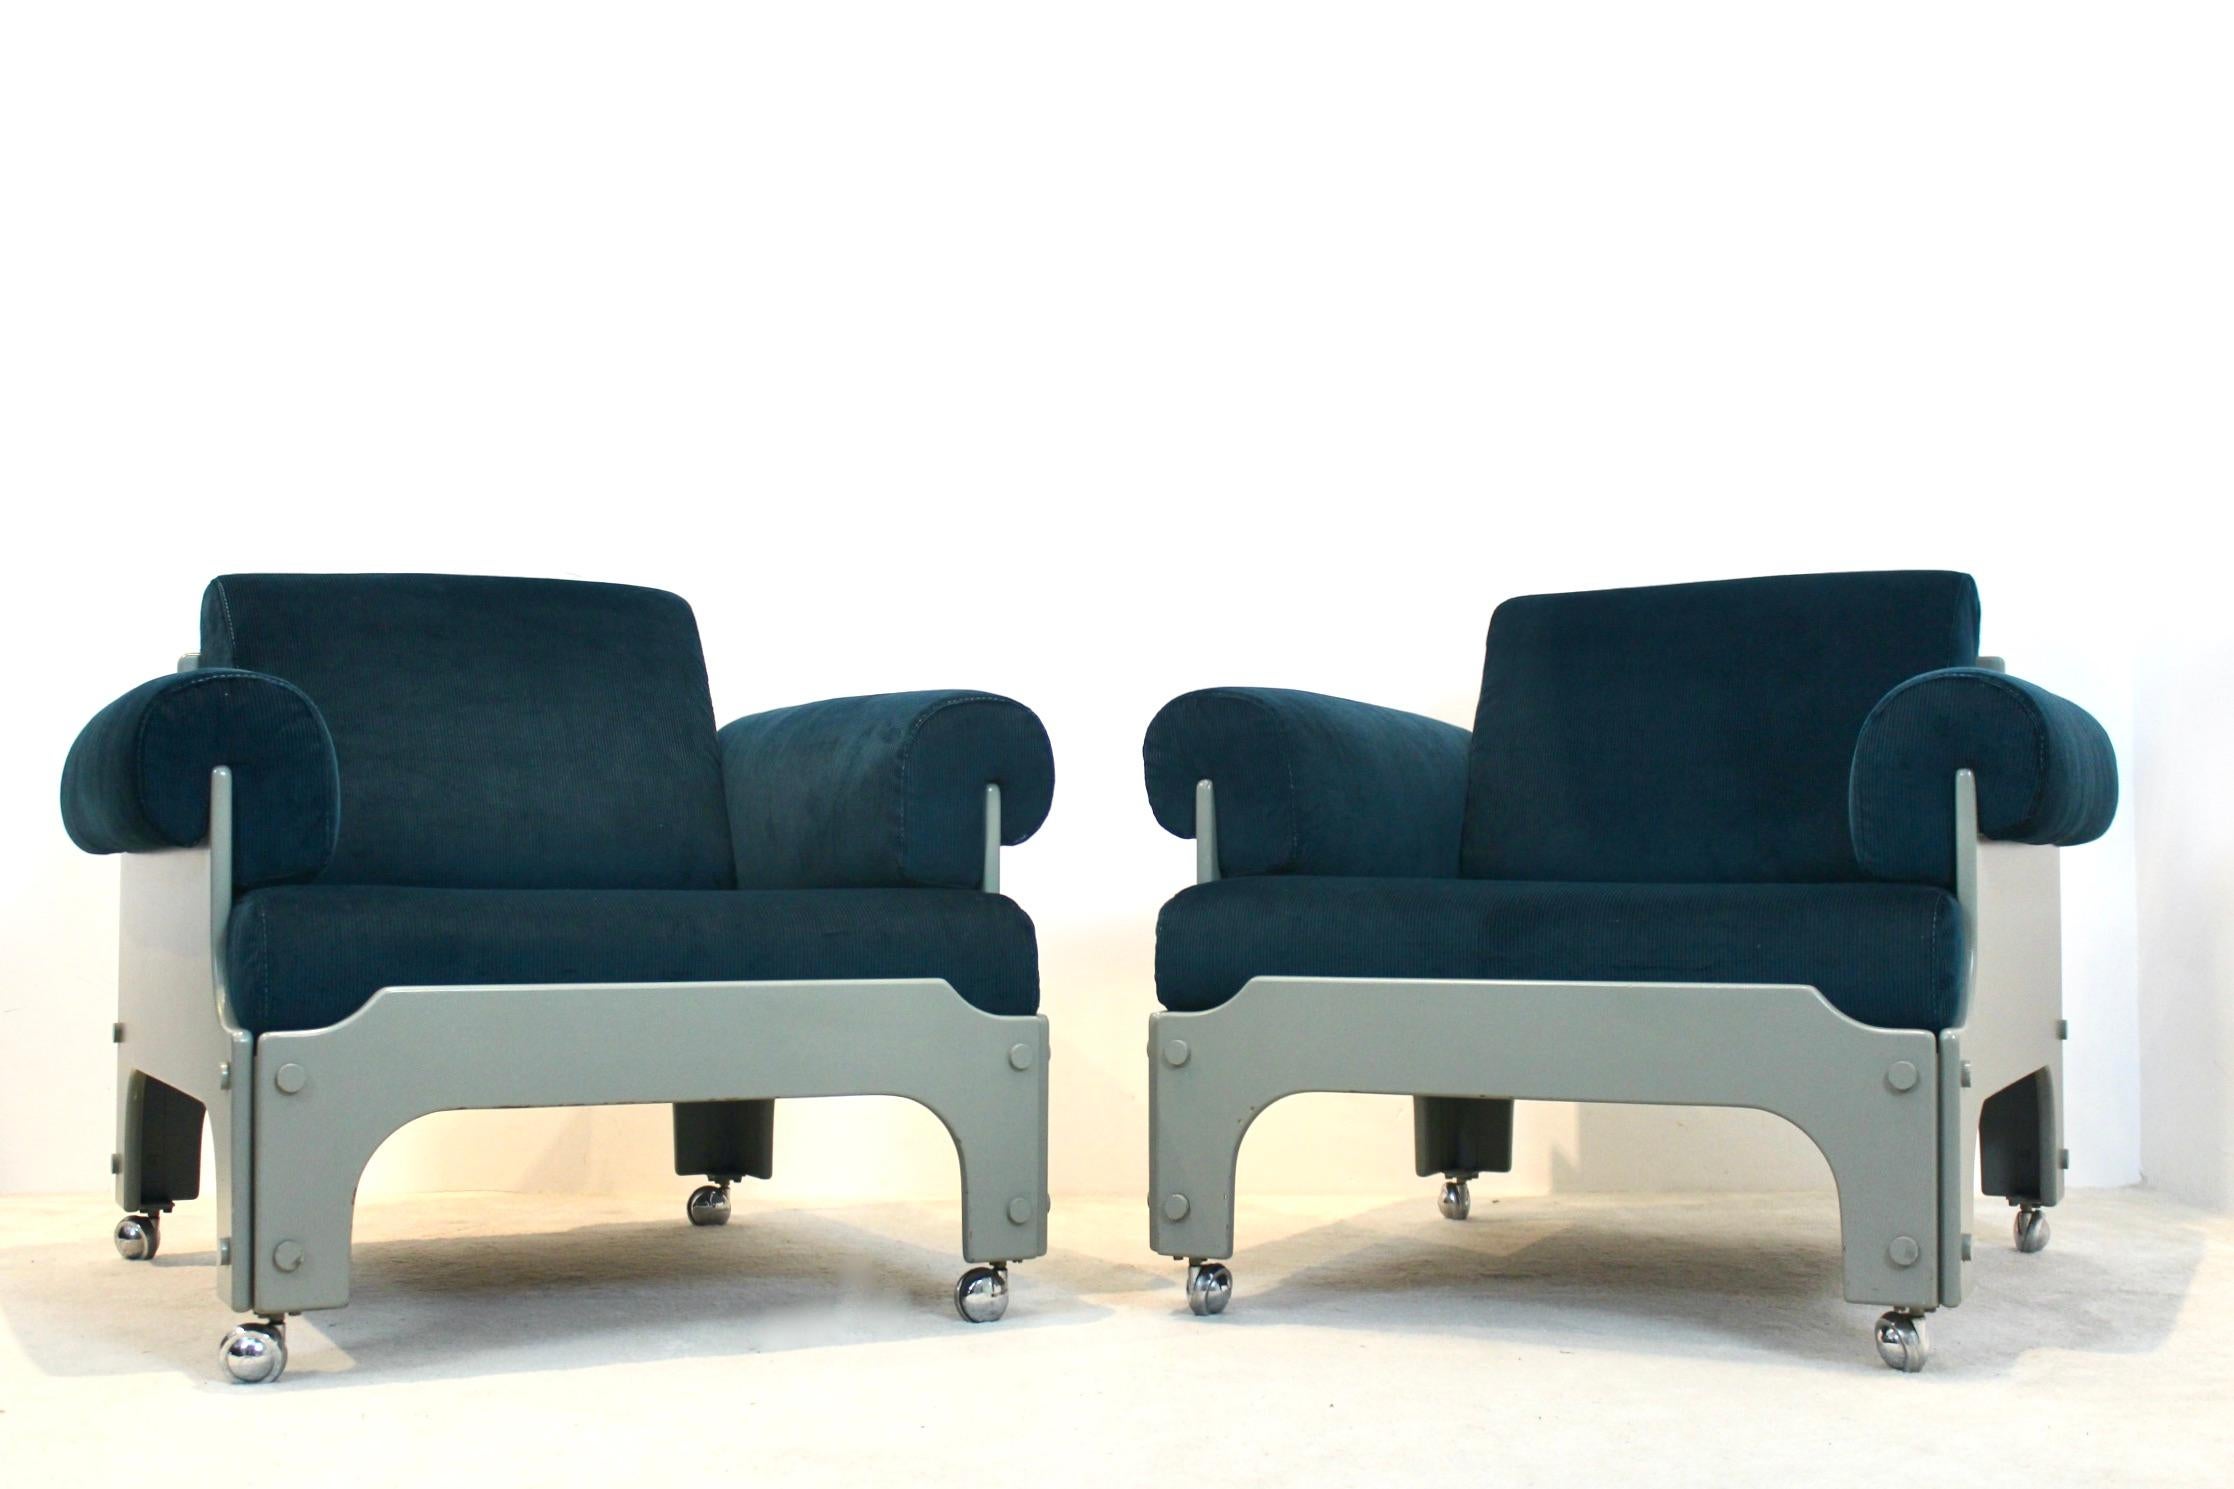 Very Rare SZ 85 Spectrum Easy Chairs by Jan Pieter Berghoef, 1968 For Sale 4